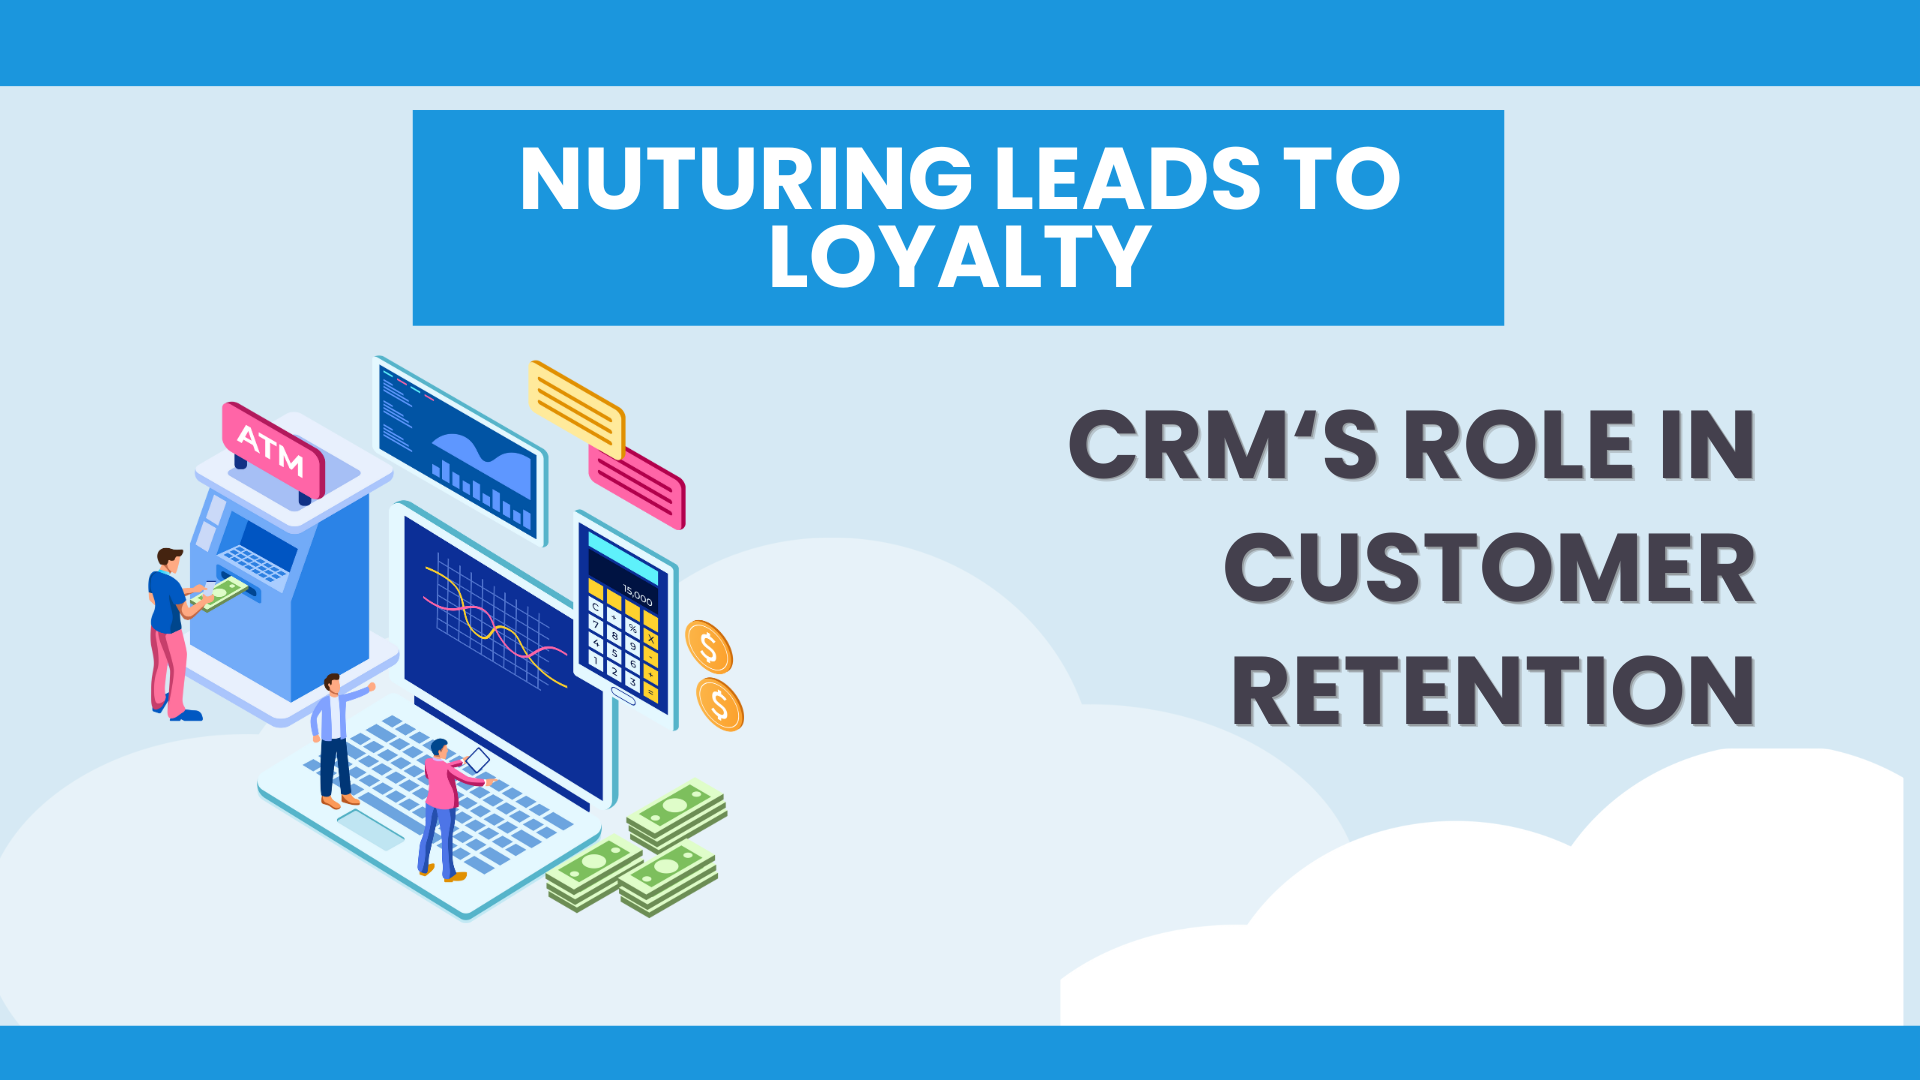 Nurturing Leads to Loyalty: CRM's Role in Customer Retention